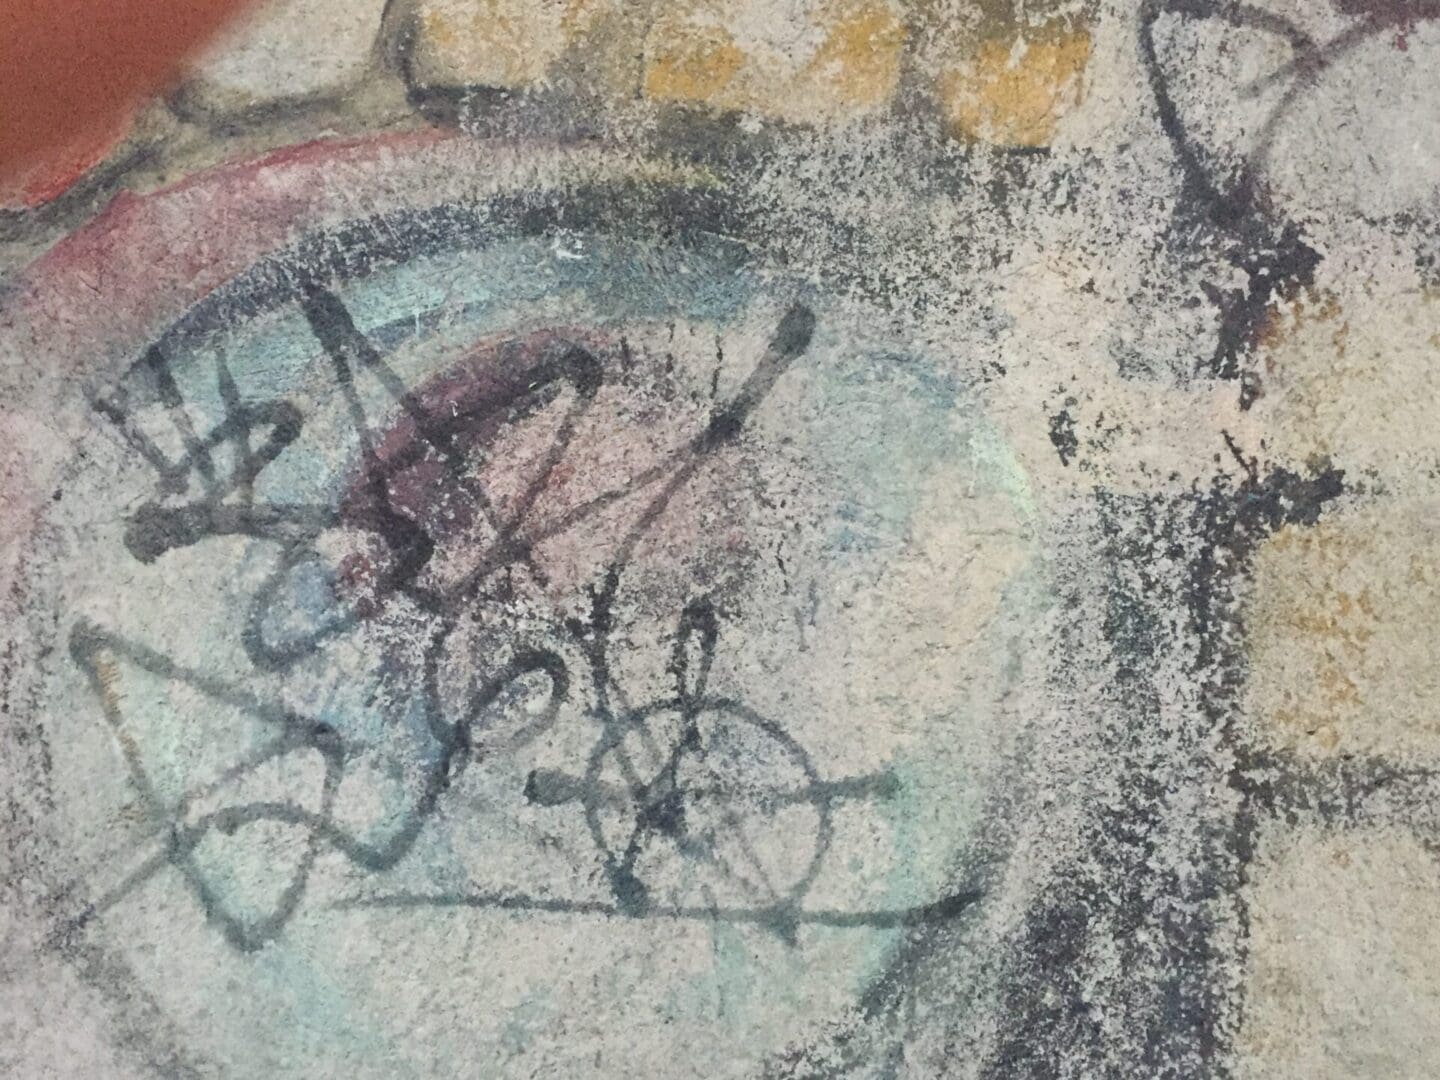 A close up of a painting with graffiti on it.